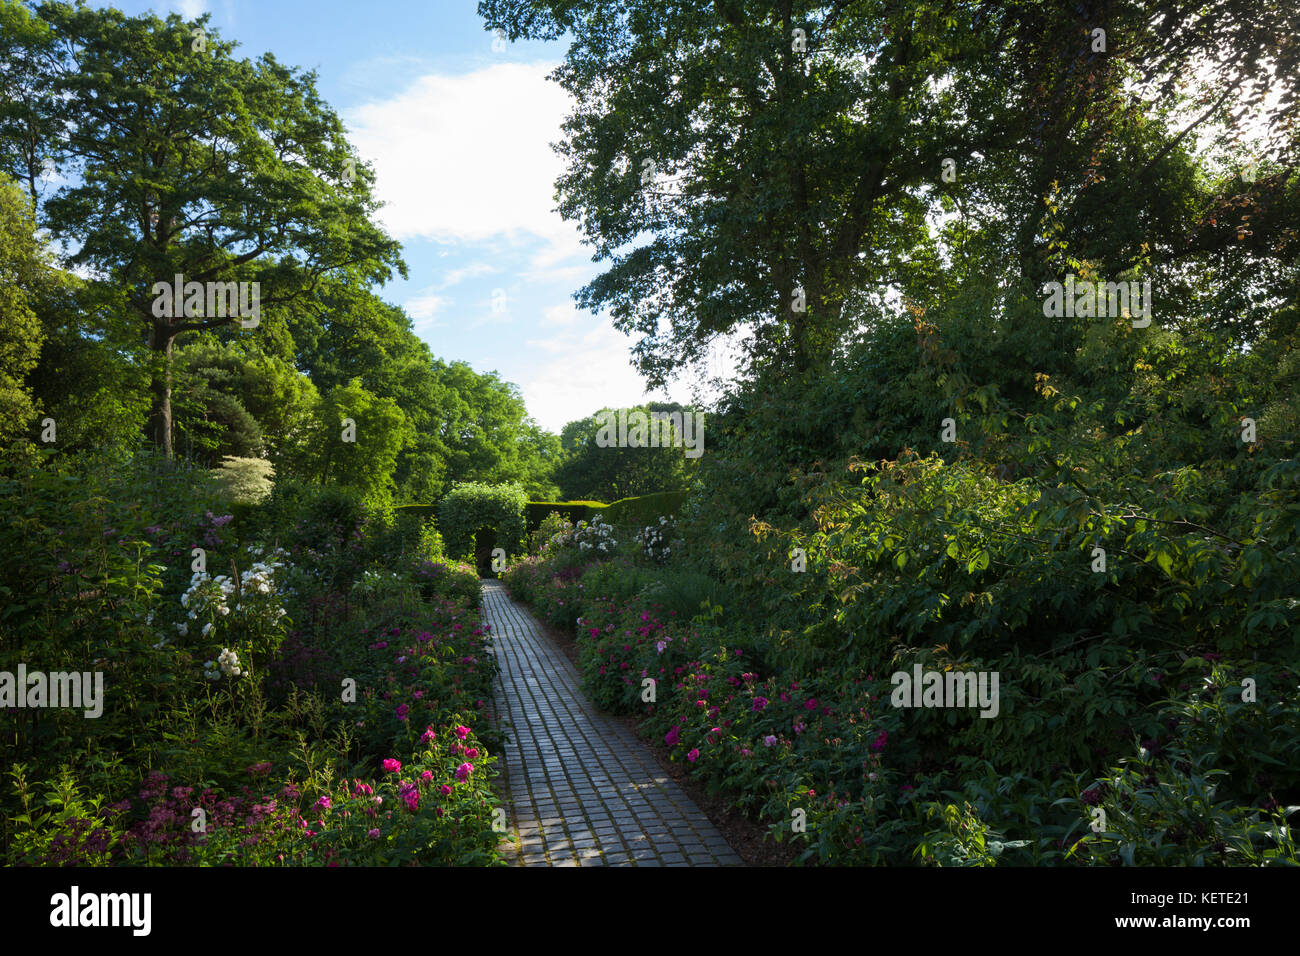 The stunning Rose Border garden with its brick paved path at Kiftsgate Court in early morning light near Chipping Campden, Cotswolds, Gloucestershire. Stock Photo